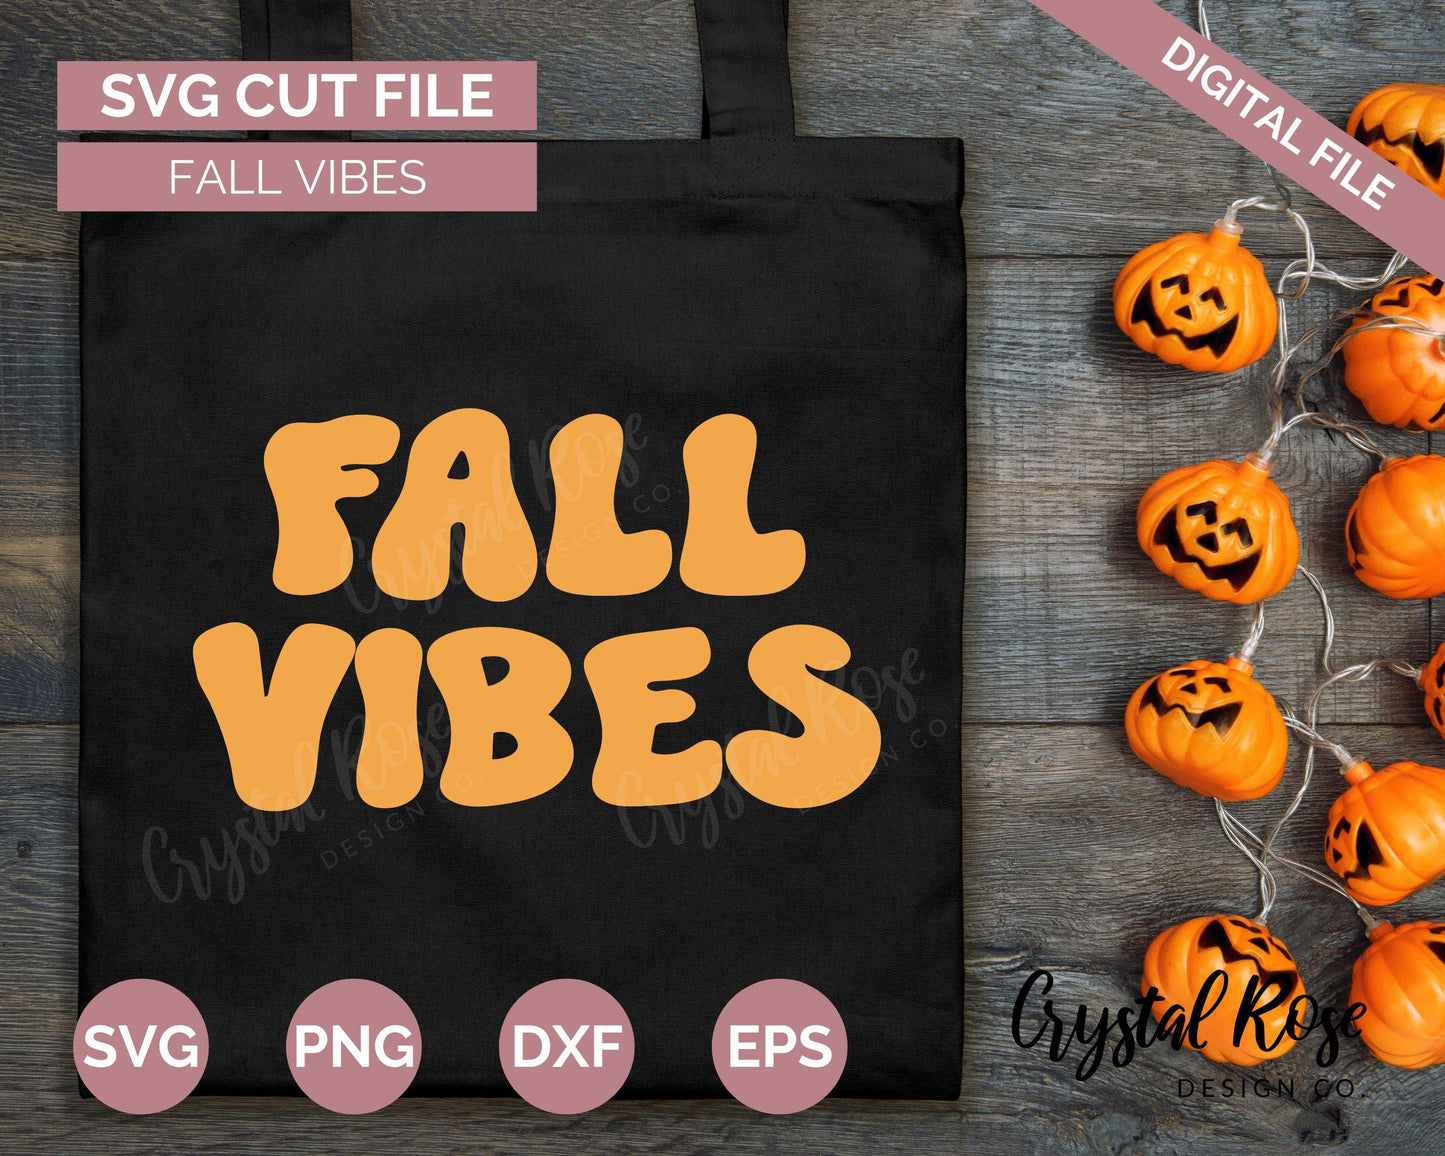 Fall Vibes SVG, Halloween SVG, Digital Download, Cricut, Silhouette, Glowforge (includes svg/png/dxf/eps)